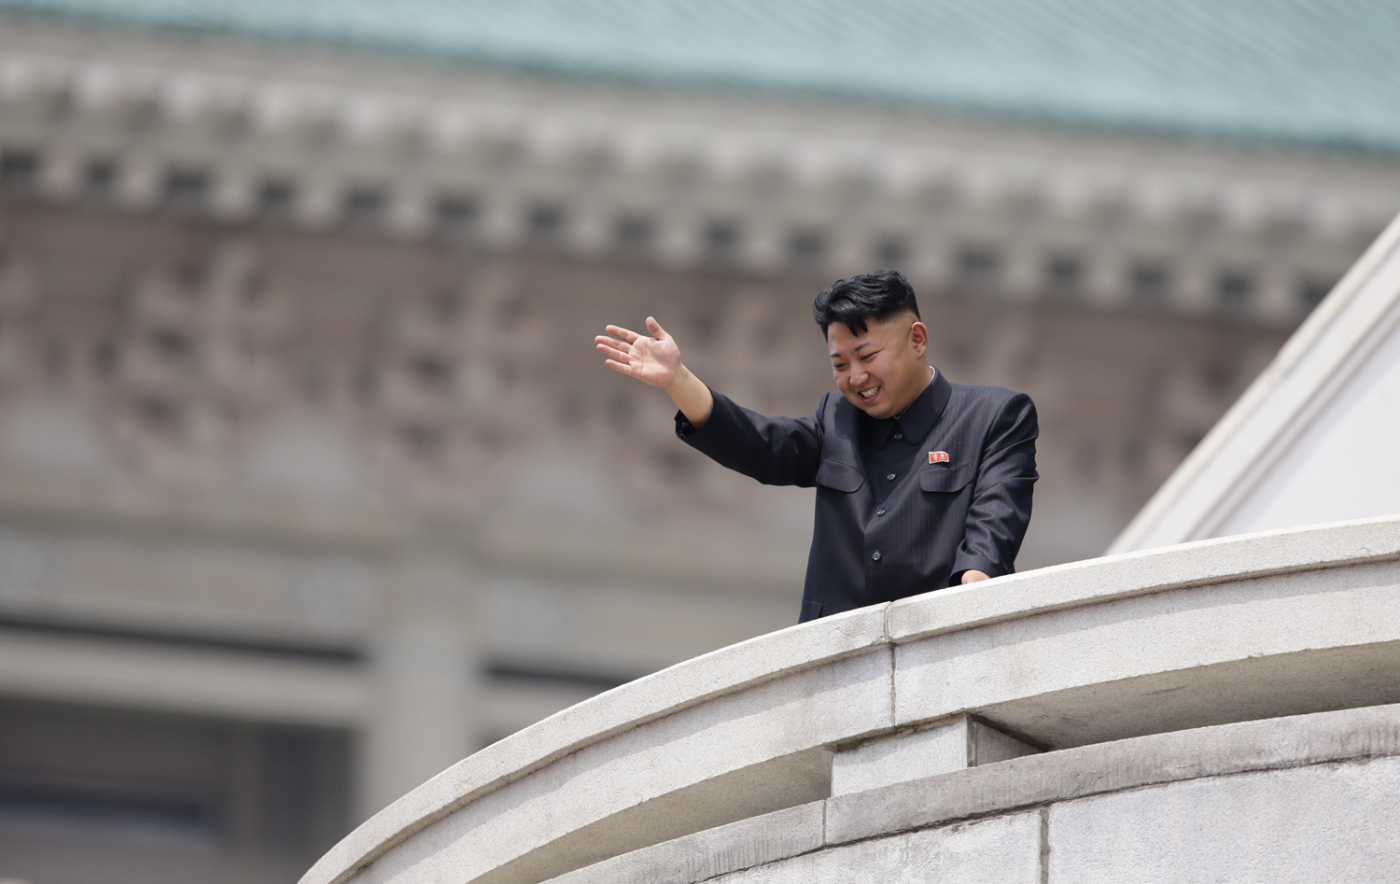 North Korean leader Kim Jong-un waves to the people during a parade to commemorate the 60th anniversary of the signing of a truce in the 1950-1953 Korean War, at Kim Il-sung Square in Pyongyang July 27, 2013. (Jason Lee—Reuters)